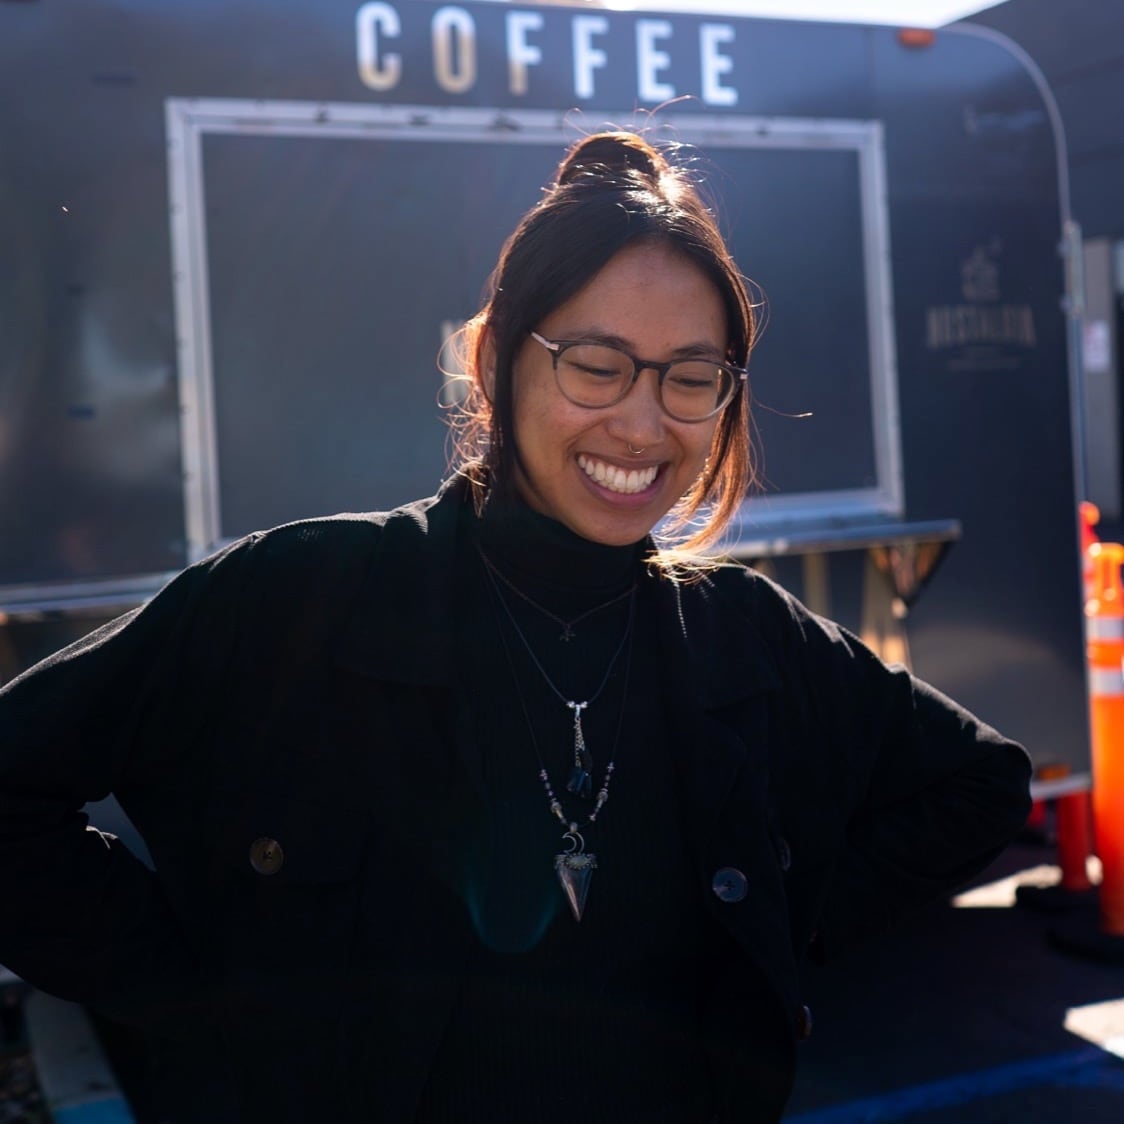 Juslene, wearing glasses, smiling in the sun in front of the Nostalgia Coffee Truck